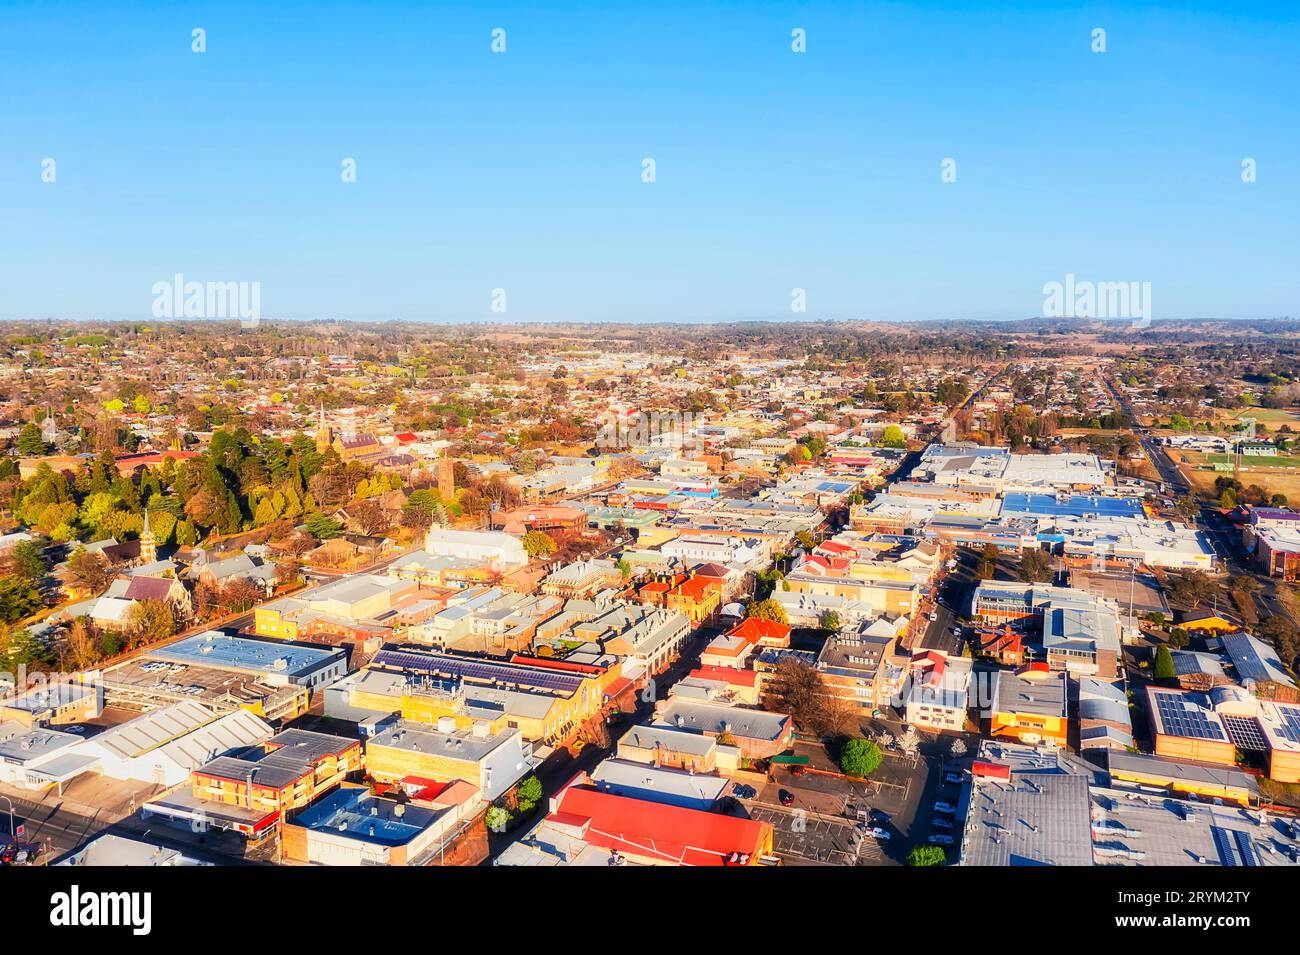 Aerial townscape view over Armidate downtown on highlands plateau in Australia. Stock Photo